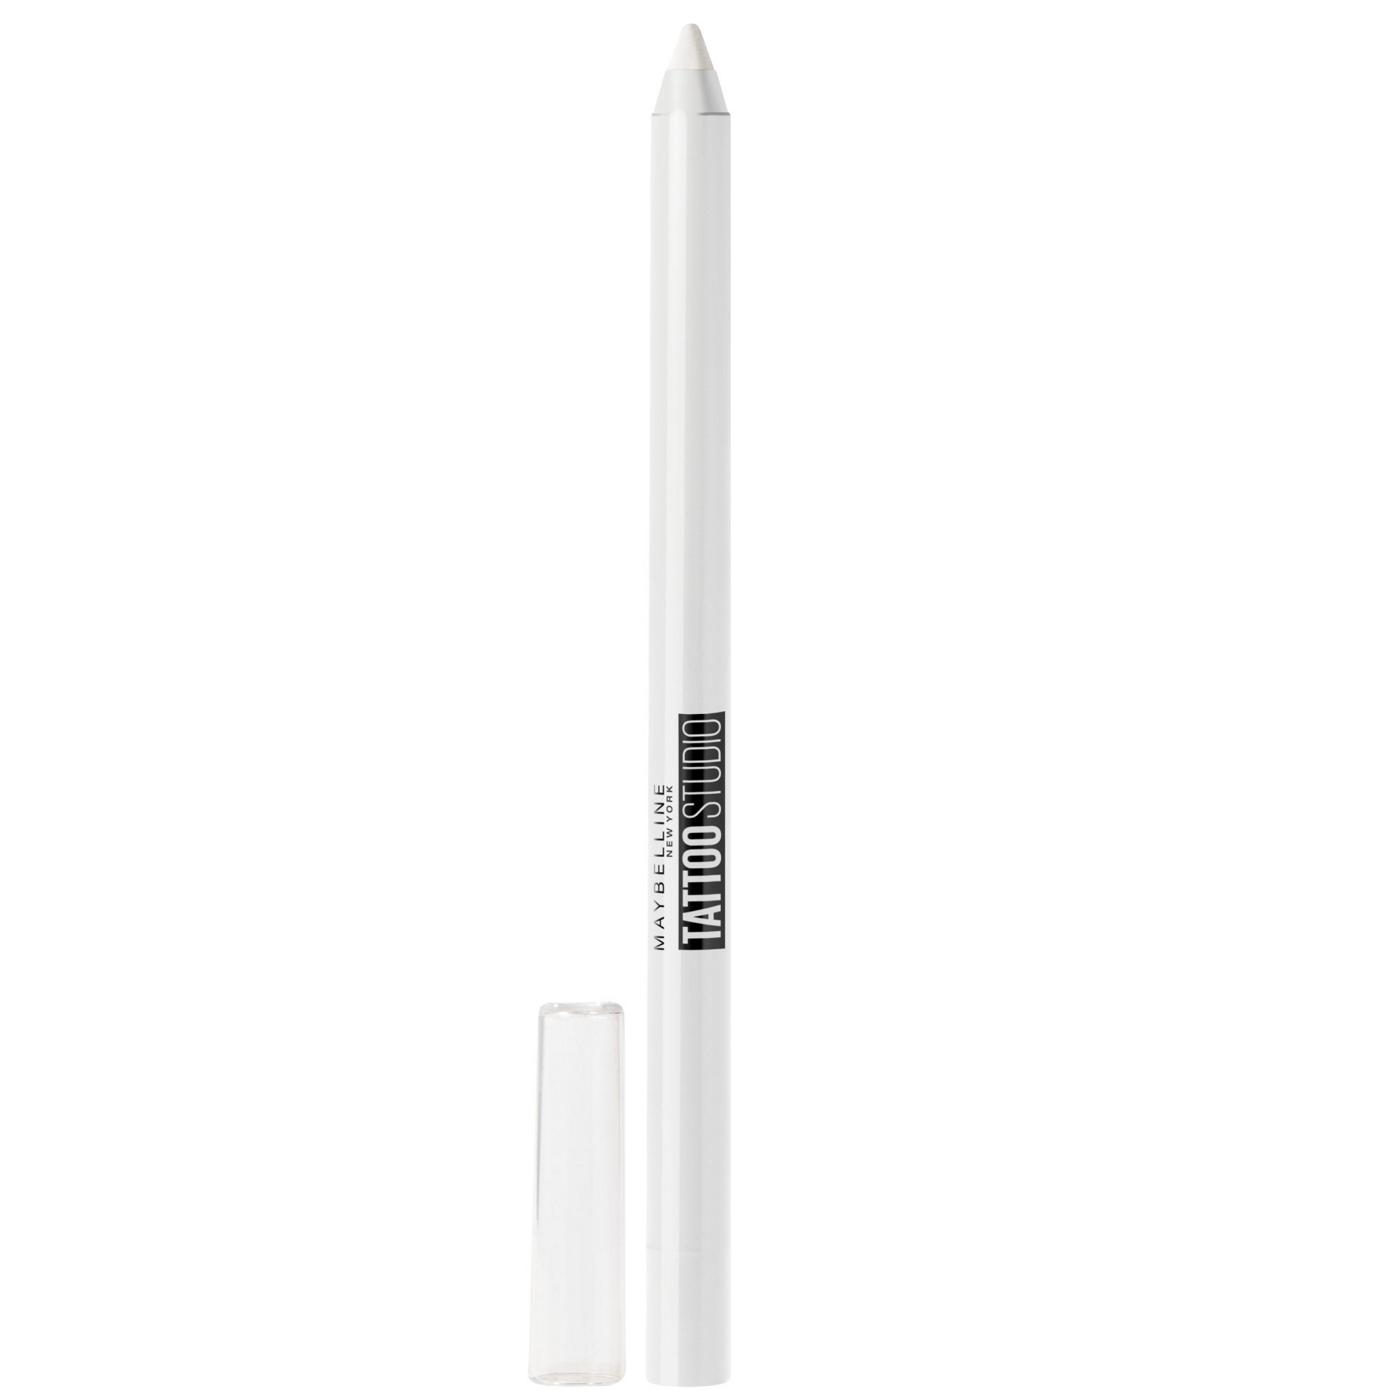 Maybelline Tattoo Studio Sharpenable Gel Pencil - Polished White; image 2 of 3